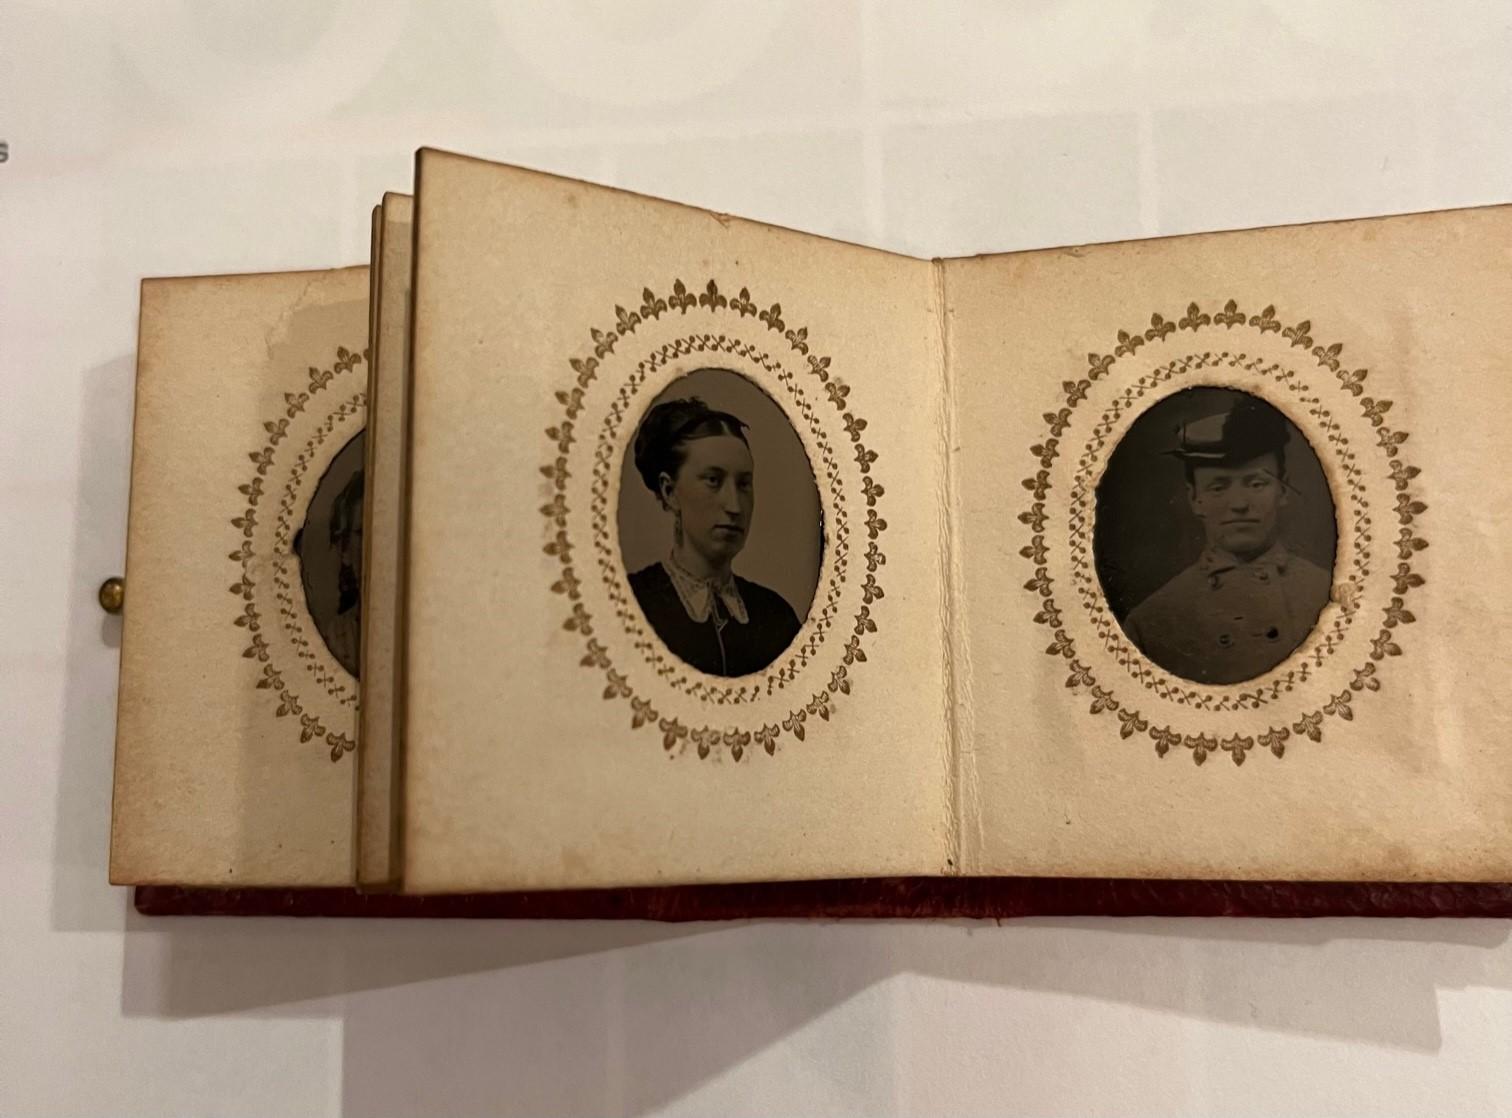 Antique Gem-Size Tintype Portraits Miniature Leather Album 1860-1870.

Antique and very rare leather-bound tintype photo album. Superb miniature, very well-made red leather album filled with 21 gem sized studio portrait tintypes. The leather cover